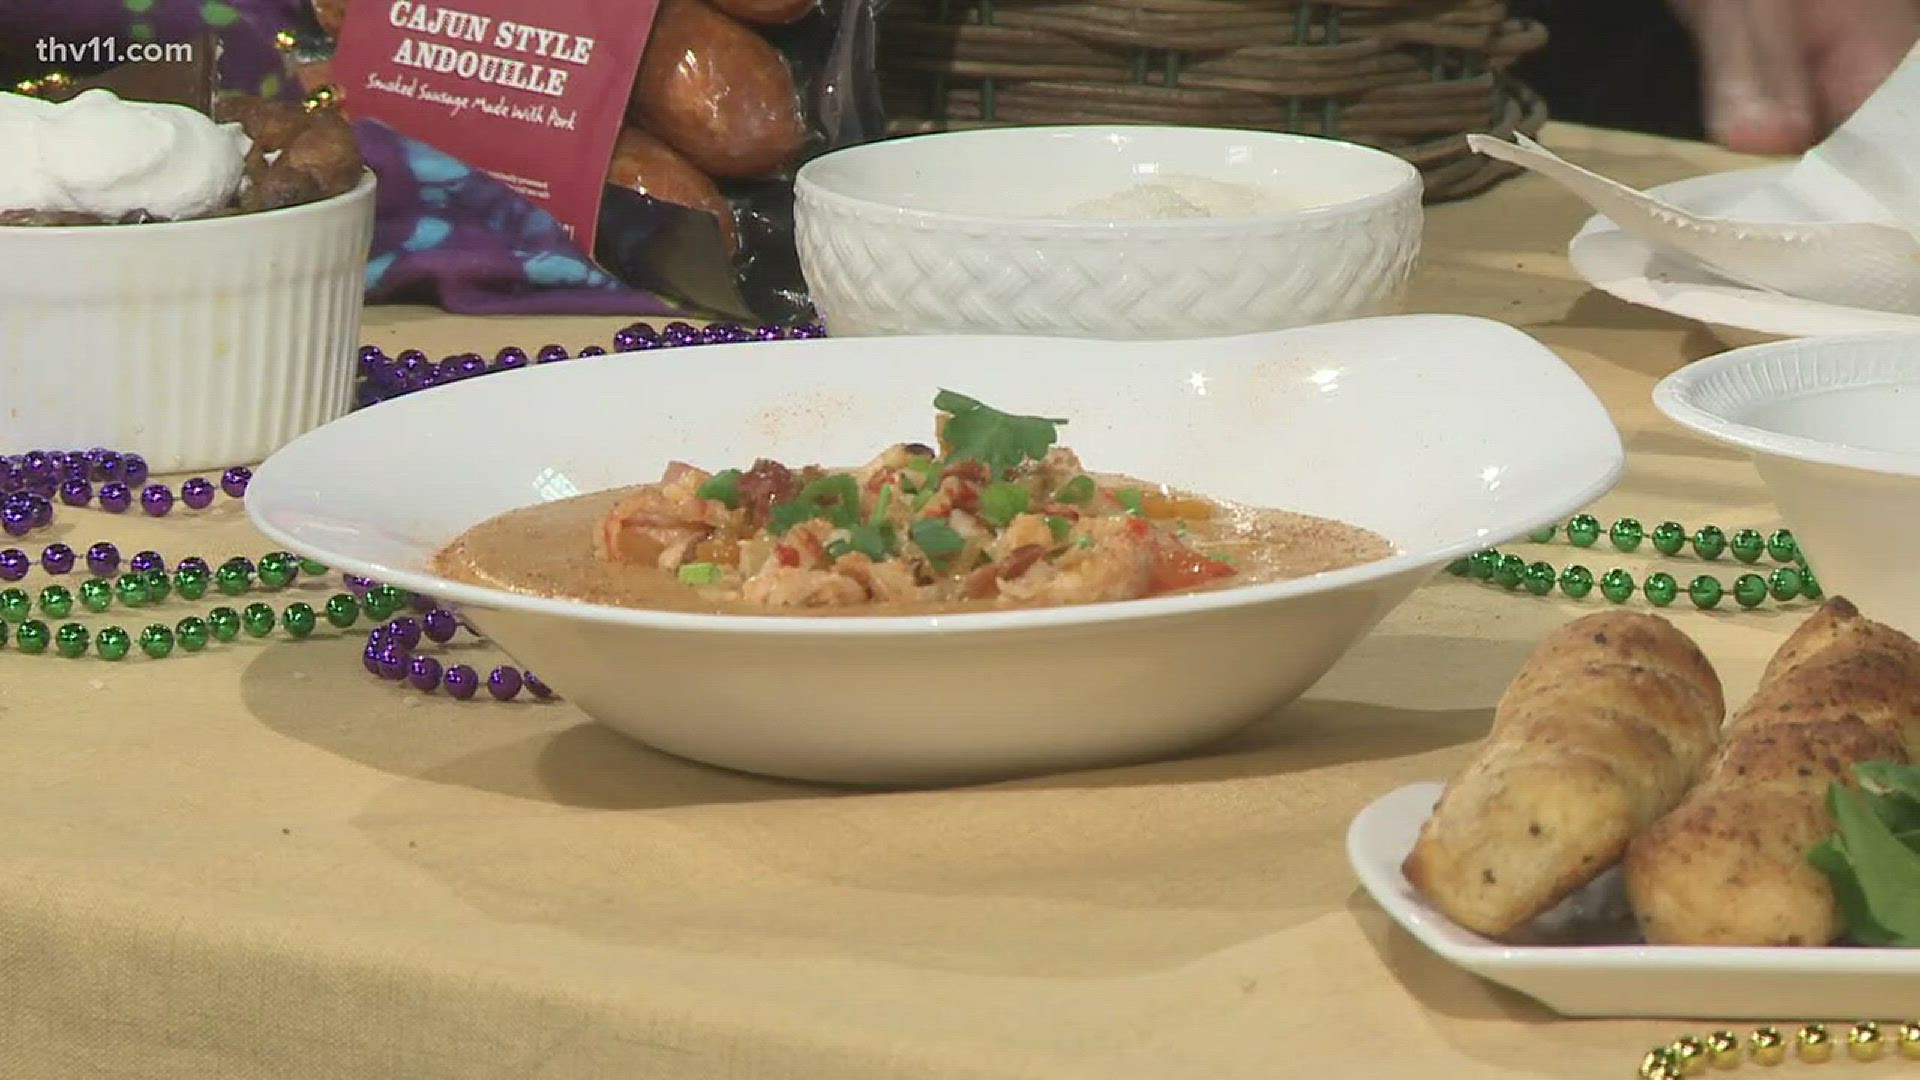 In celebration of Fat Tuesday, Debbie Arnold has a New Orleans inspired dish to get you in the mood for Mardi Gras celebration